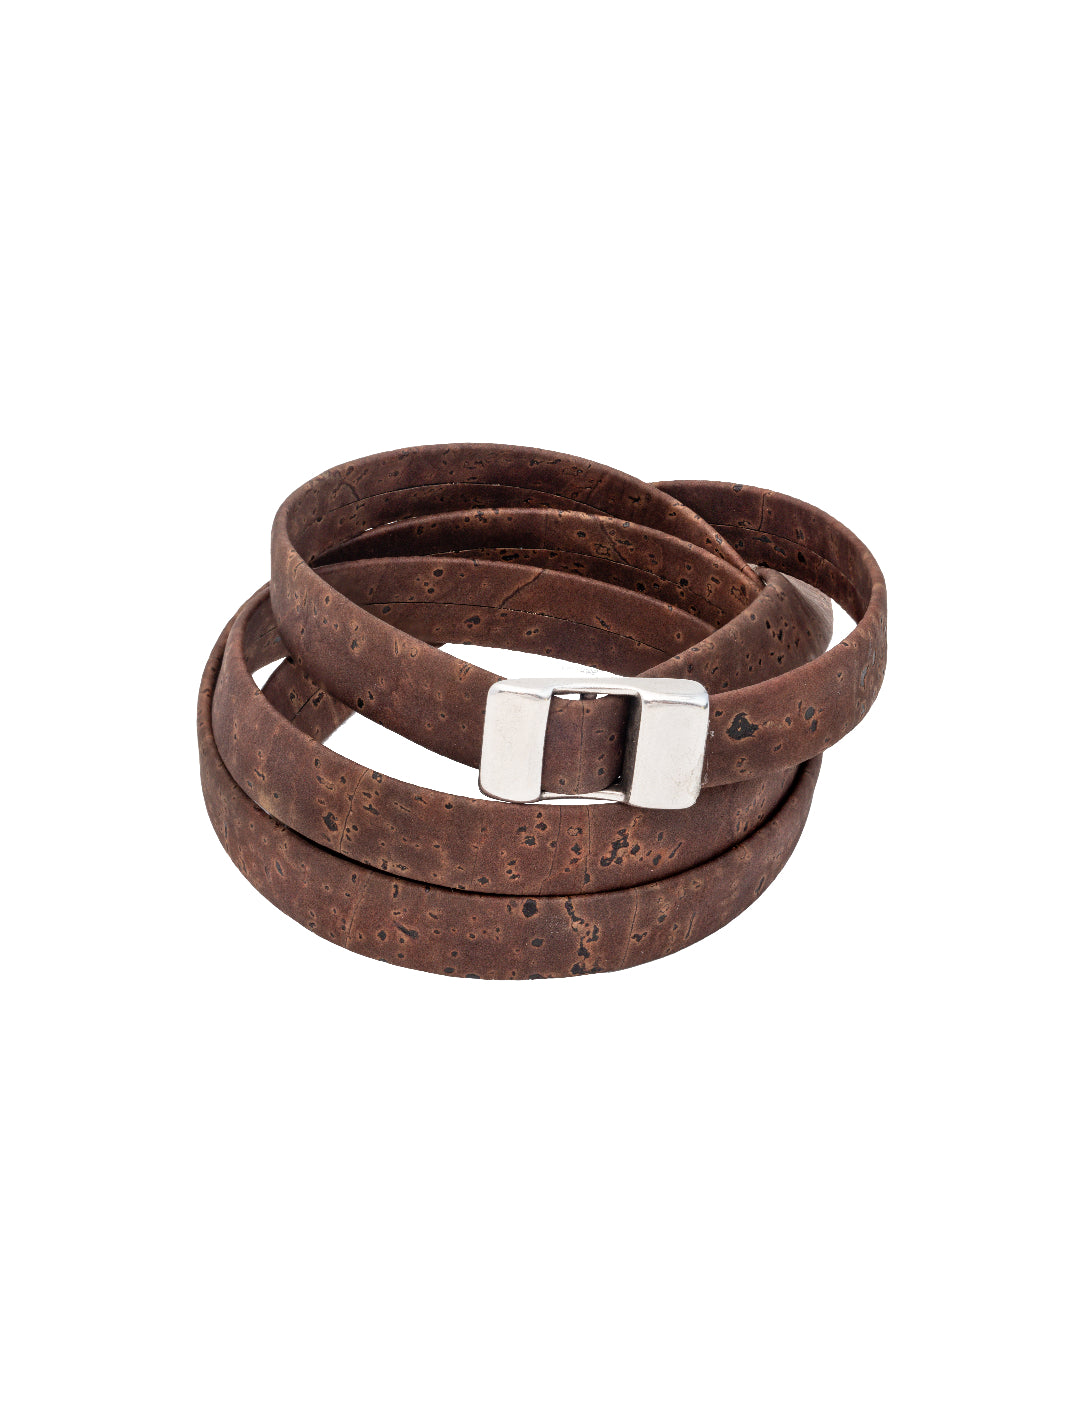 Introducing the Cocoa Clasp Adjustable Cork Wristband: eco-friendly elegance in silver and brown. With its adjustable clasp and lightweight design, it's perfect for any occasion. Comes in an elegant fabric pouch, ideal for gifting.